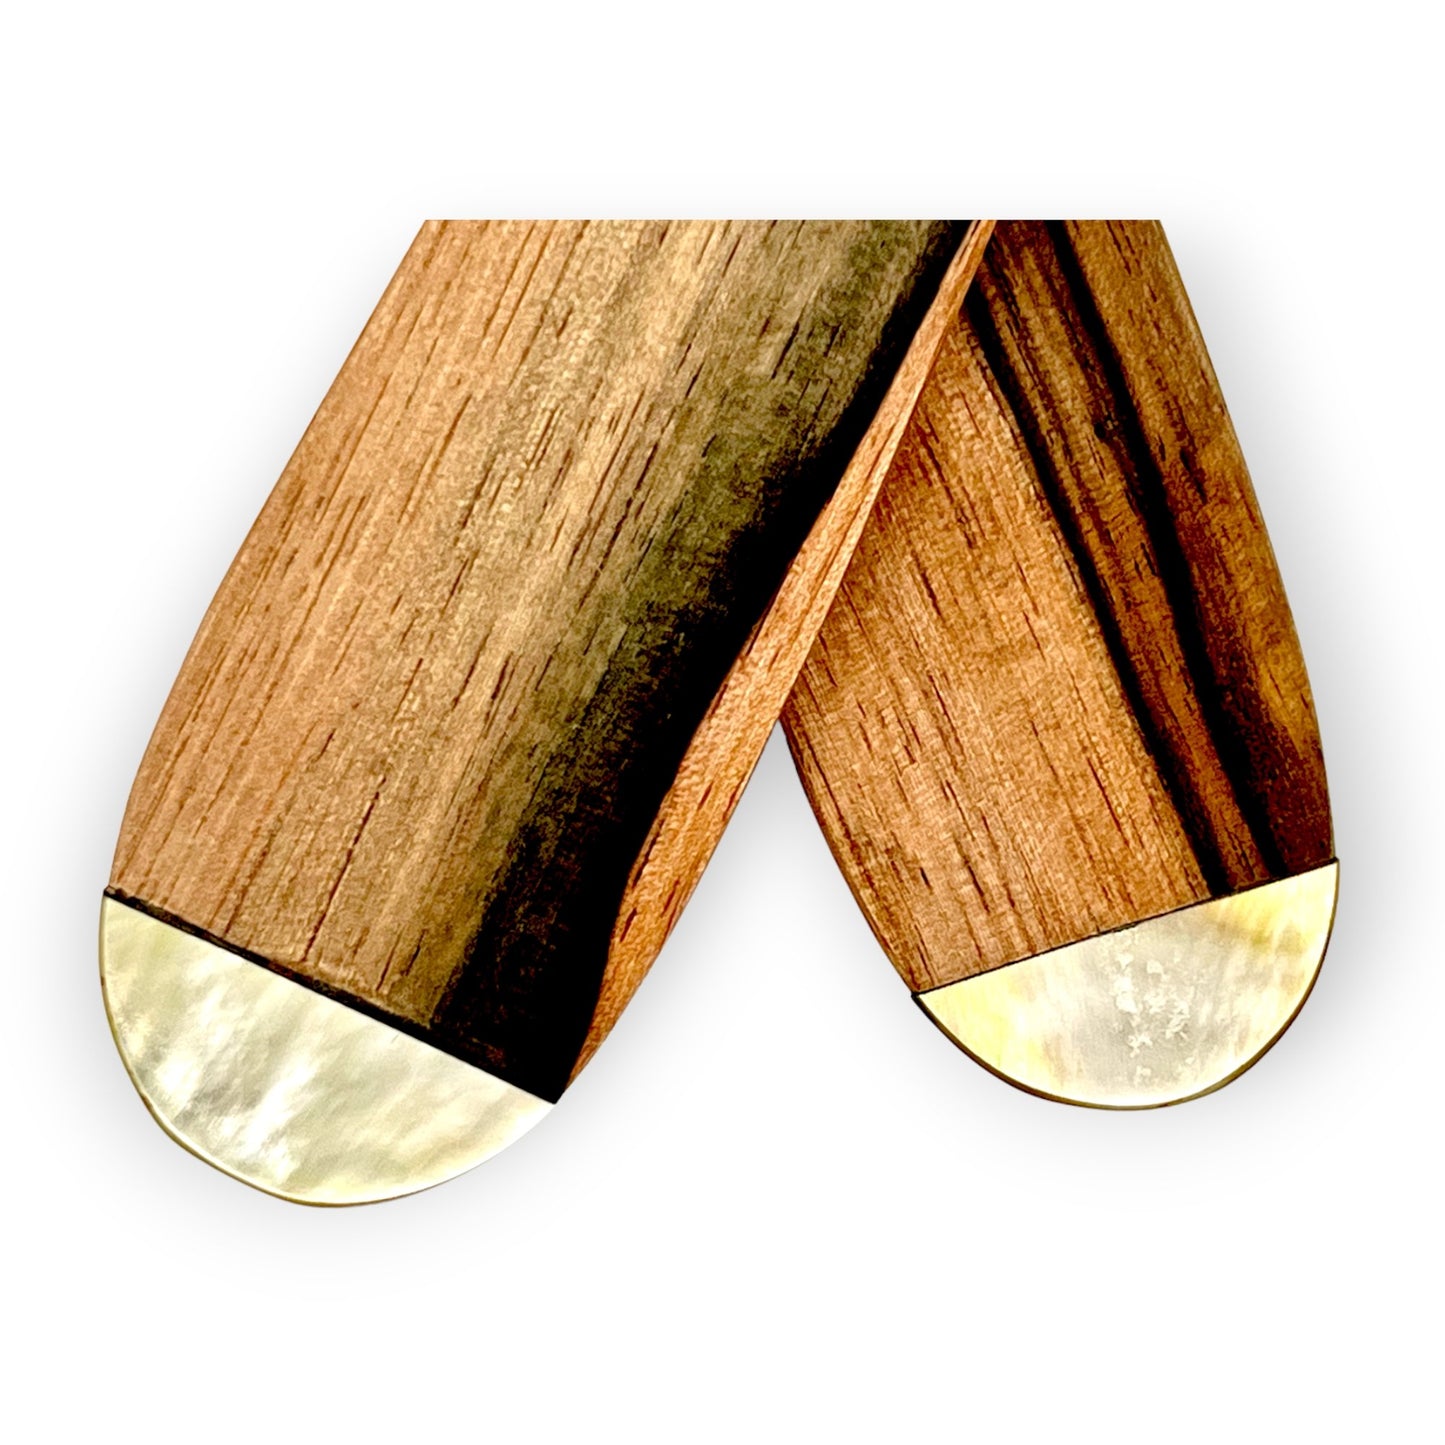 Wooden serving spoons with mother-of-pearl tips - Sundara Joon